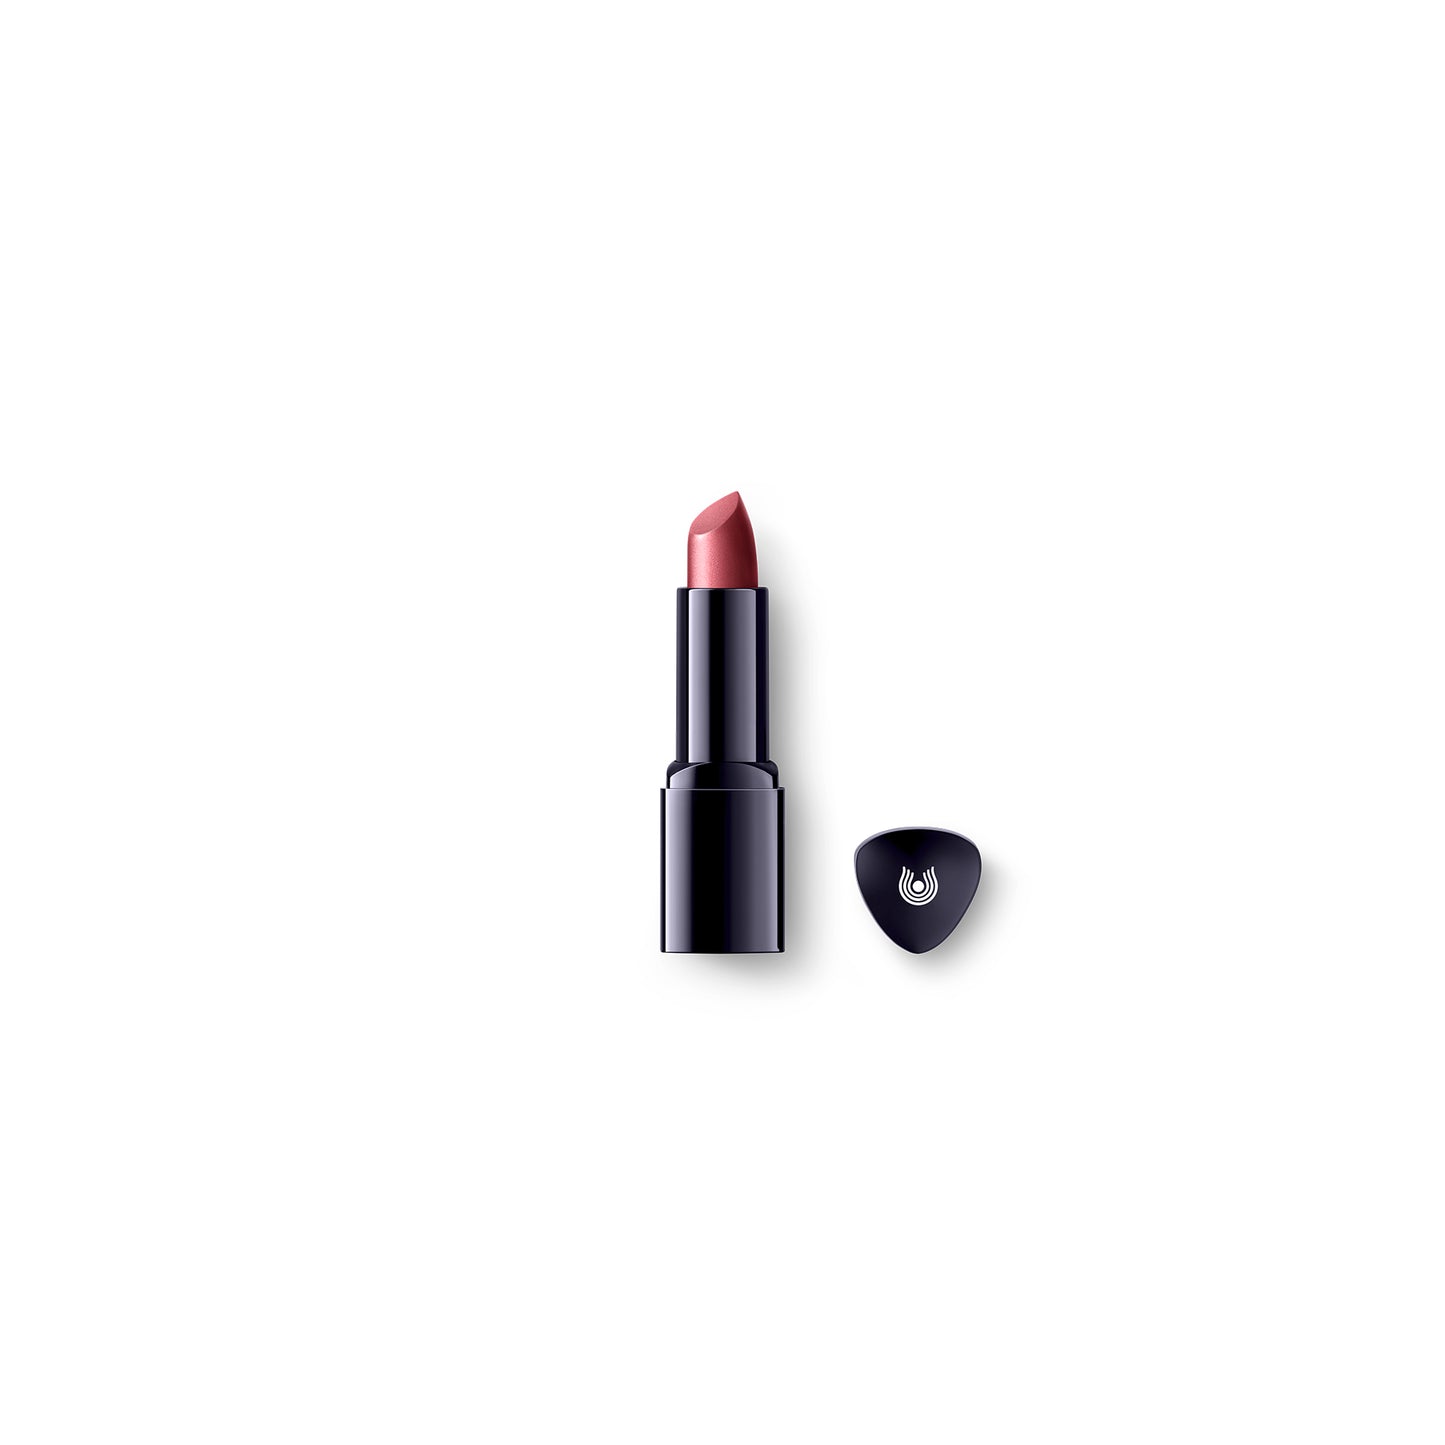 Load image into Gallery viewer, Dr. Hauschka Lipstick 26 Hibiscus 4.1g
